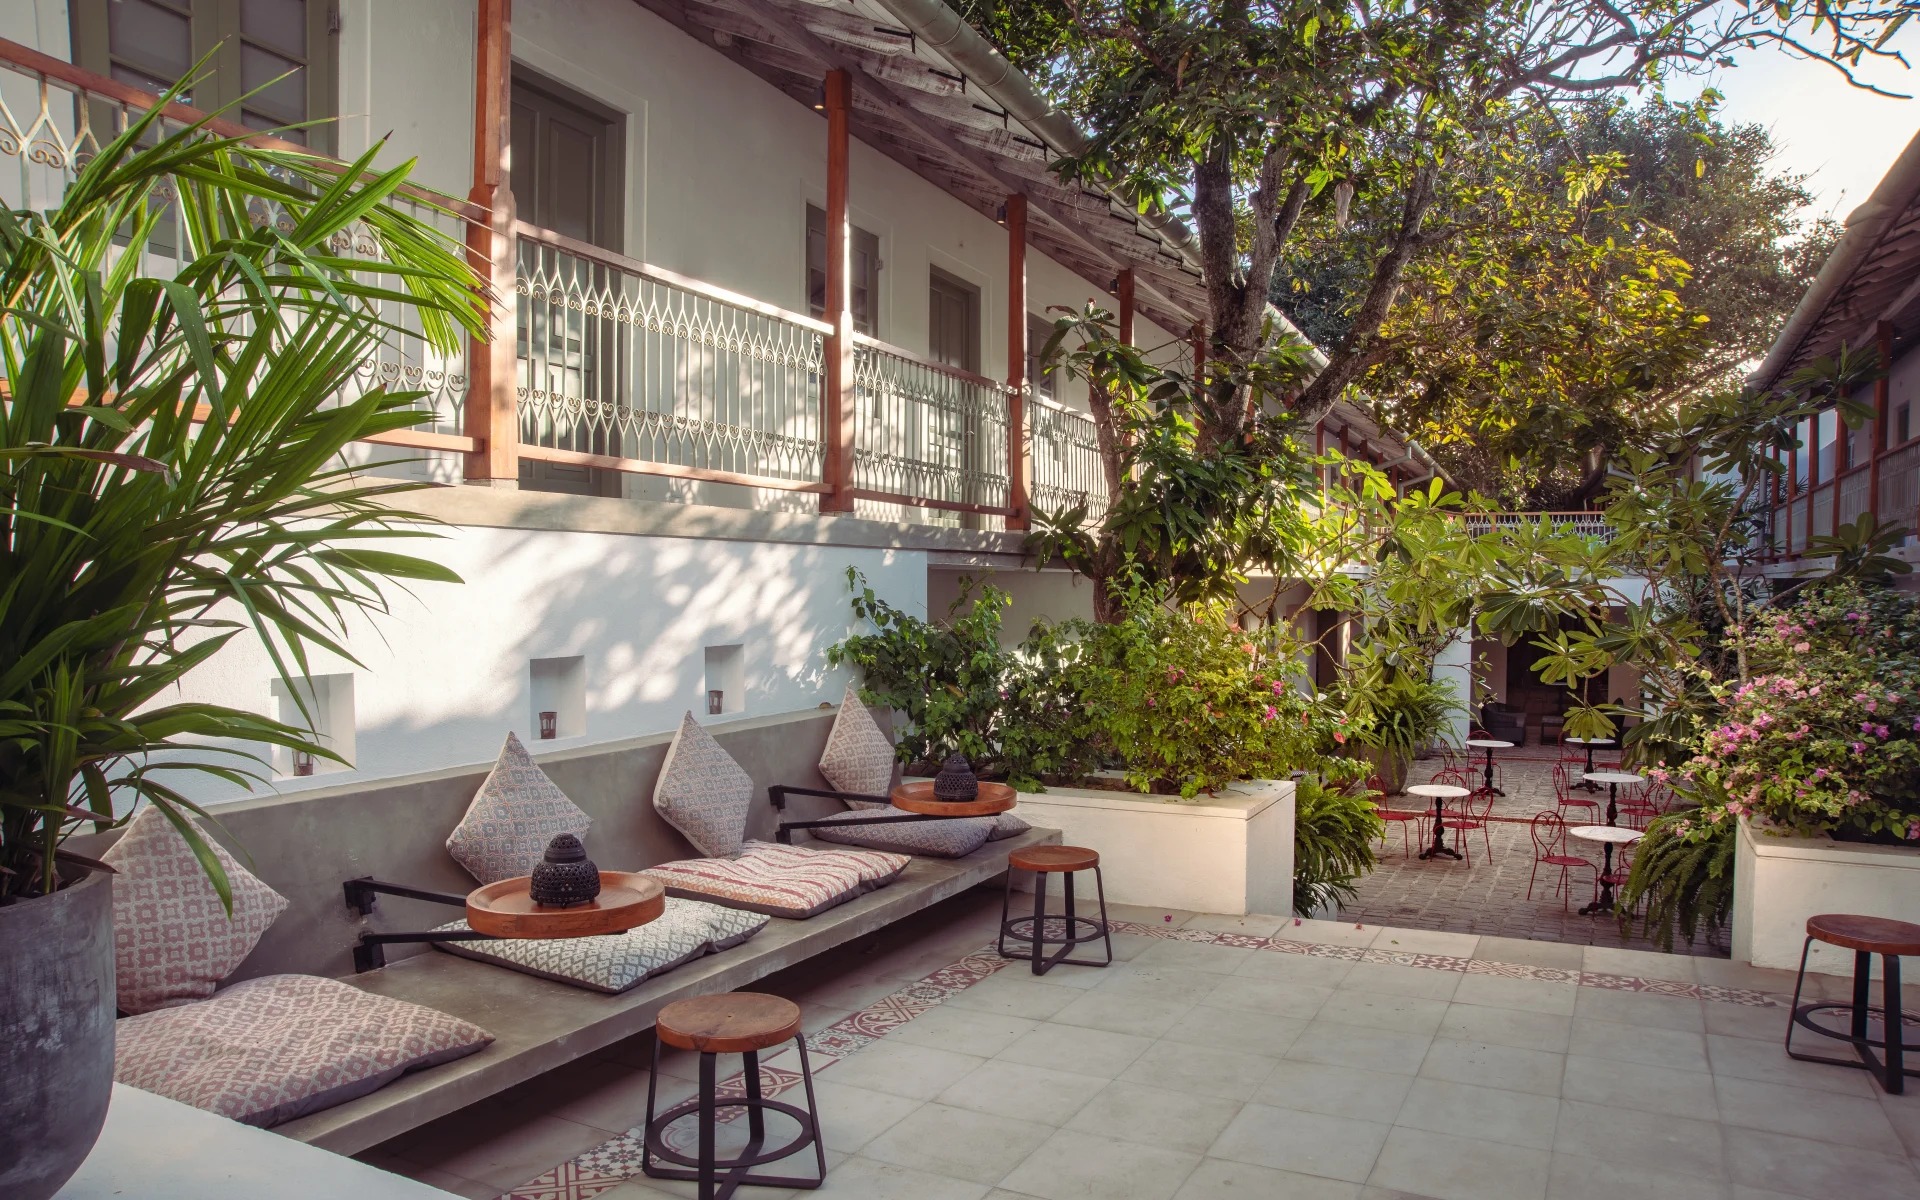 An outdoor seating area is draped in comfy pillows, beside the outdoor courtyard.